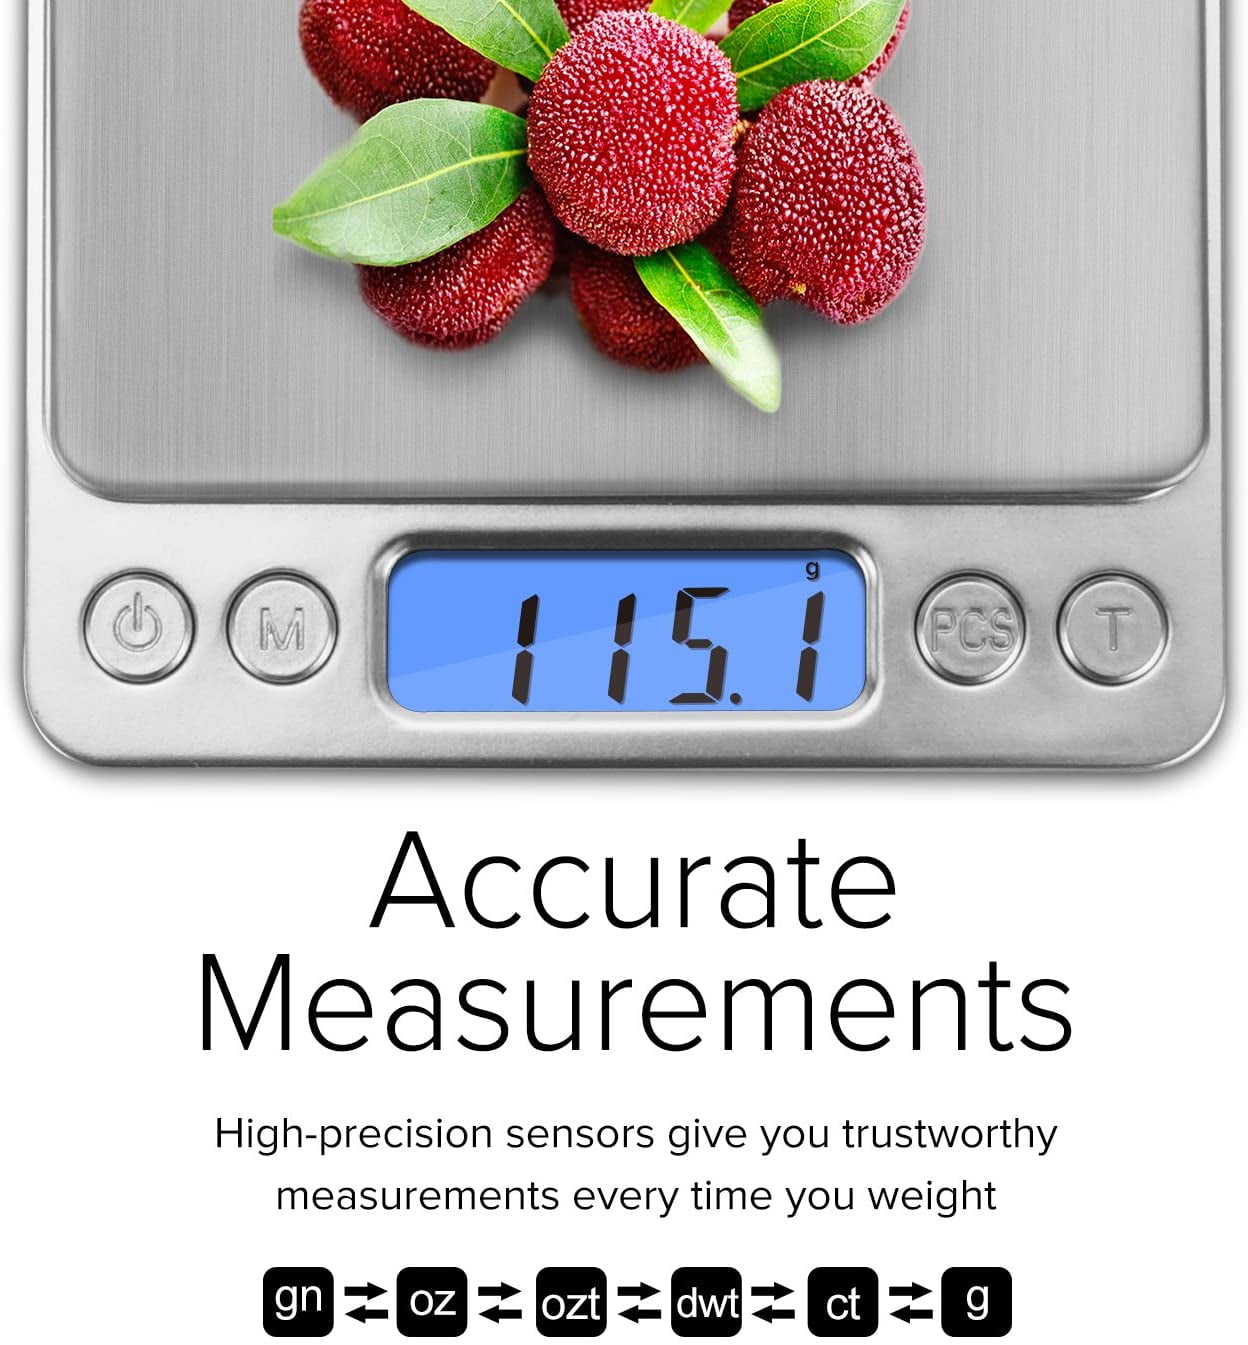 DE'VELO Accurate Digital Kitchen Scale for Food with Weight Measurement in  Grams, Ounces, and LB. Great for Baking, Cooking, Jewelry, Easy-to-Read LCD  Display - Yahoo Shopping